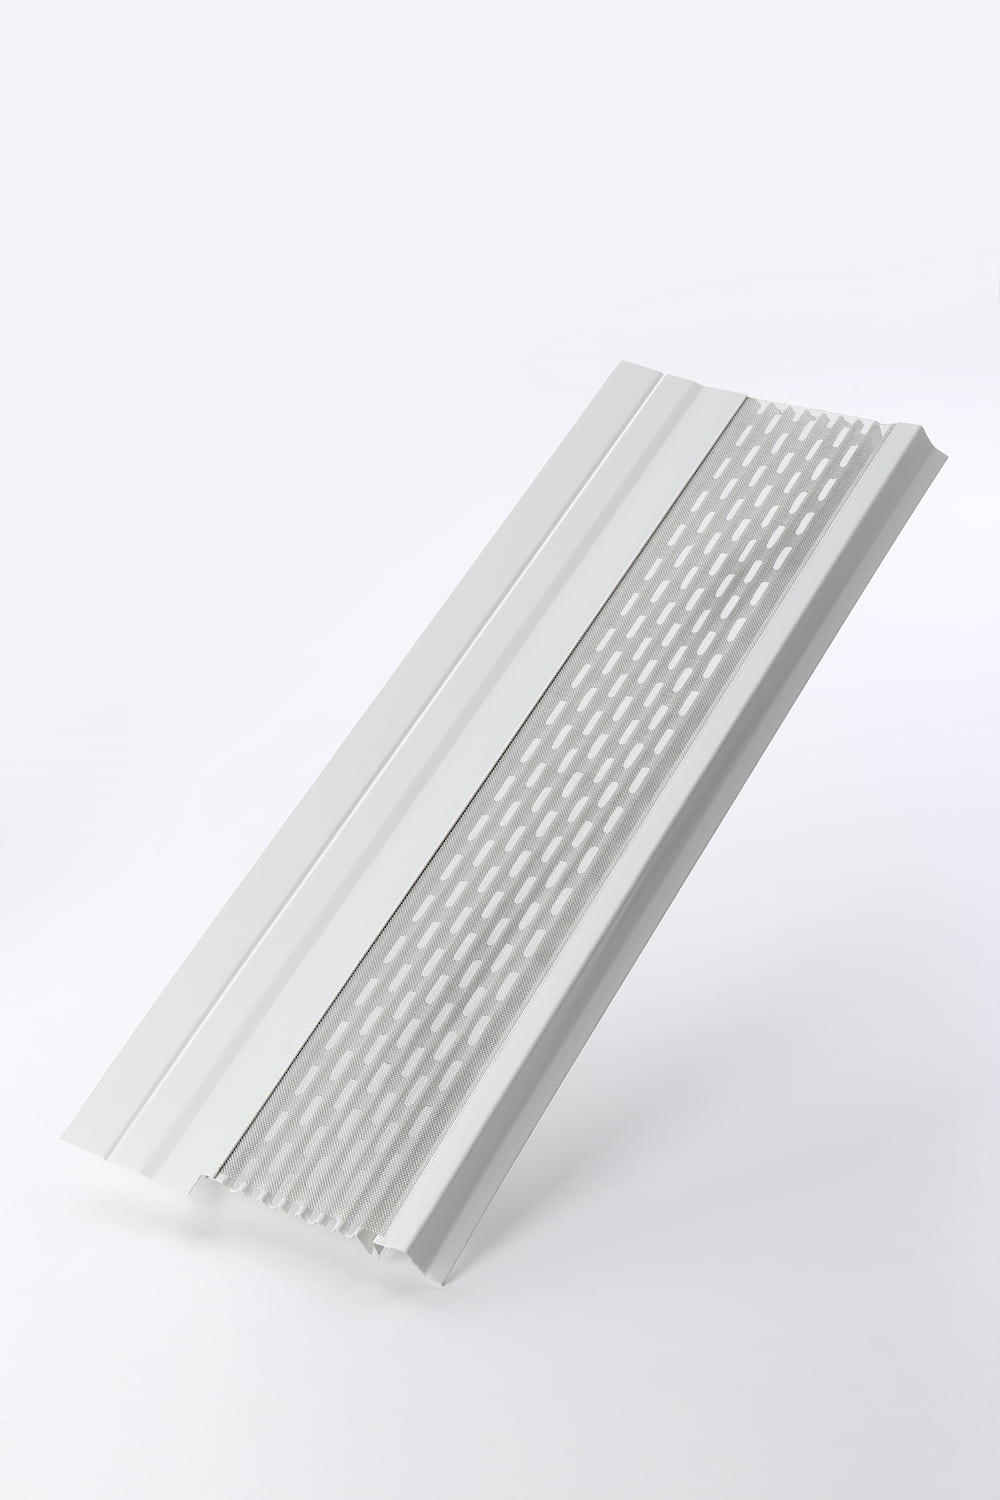 7 inch gutter guards